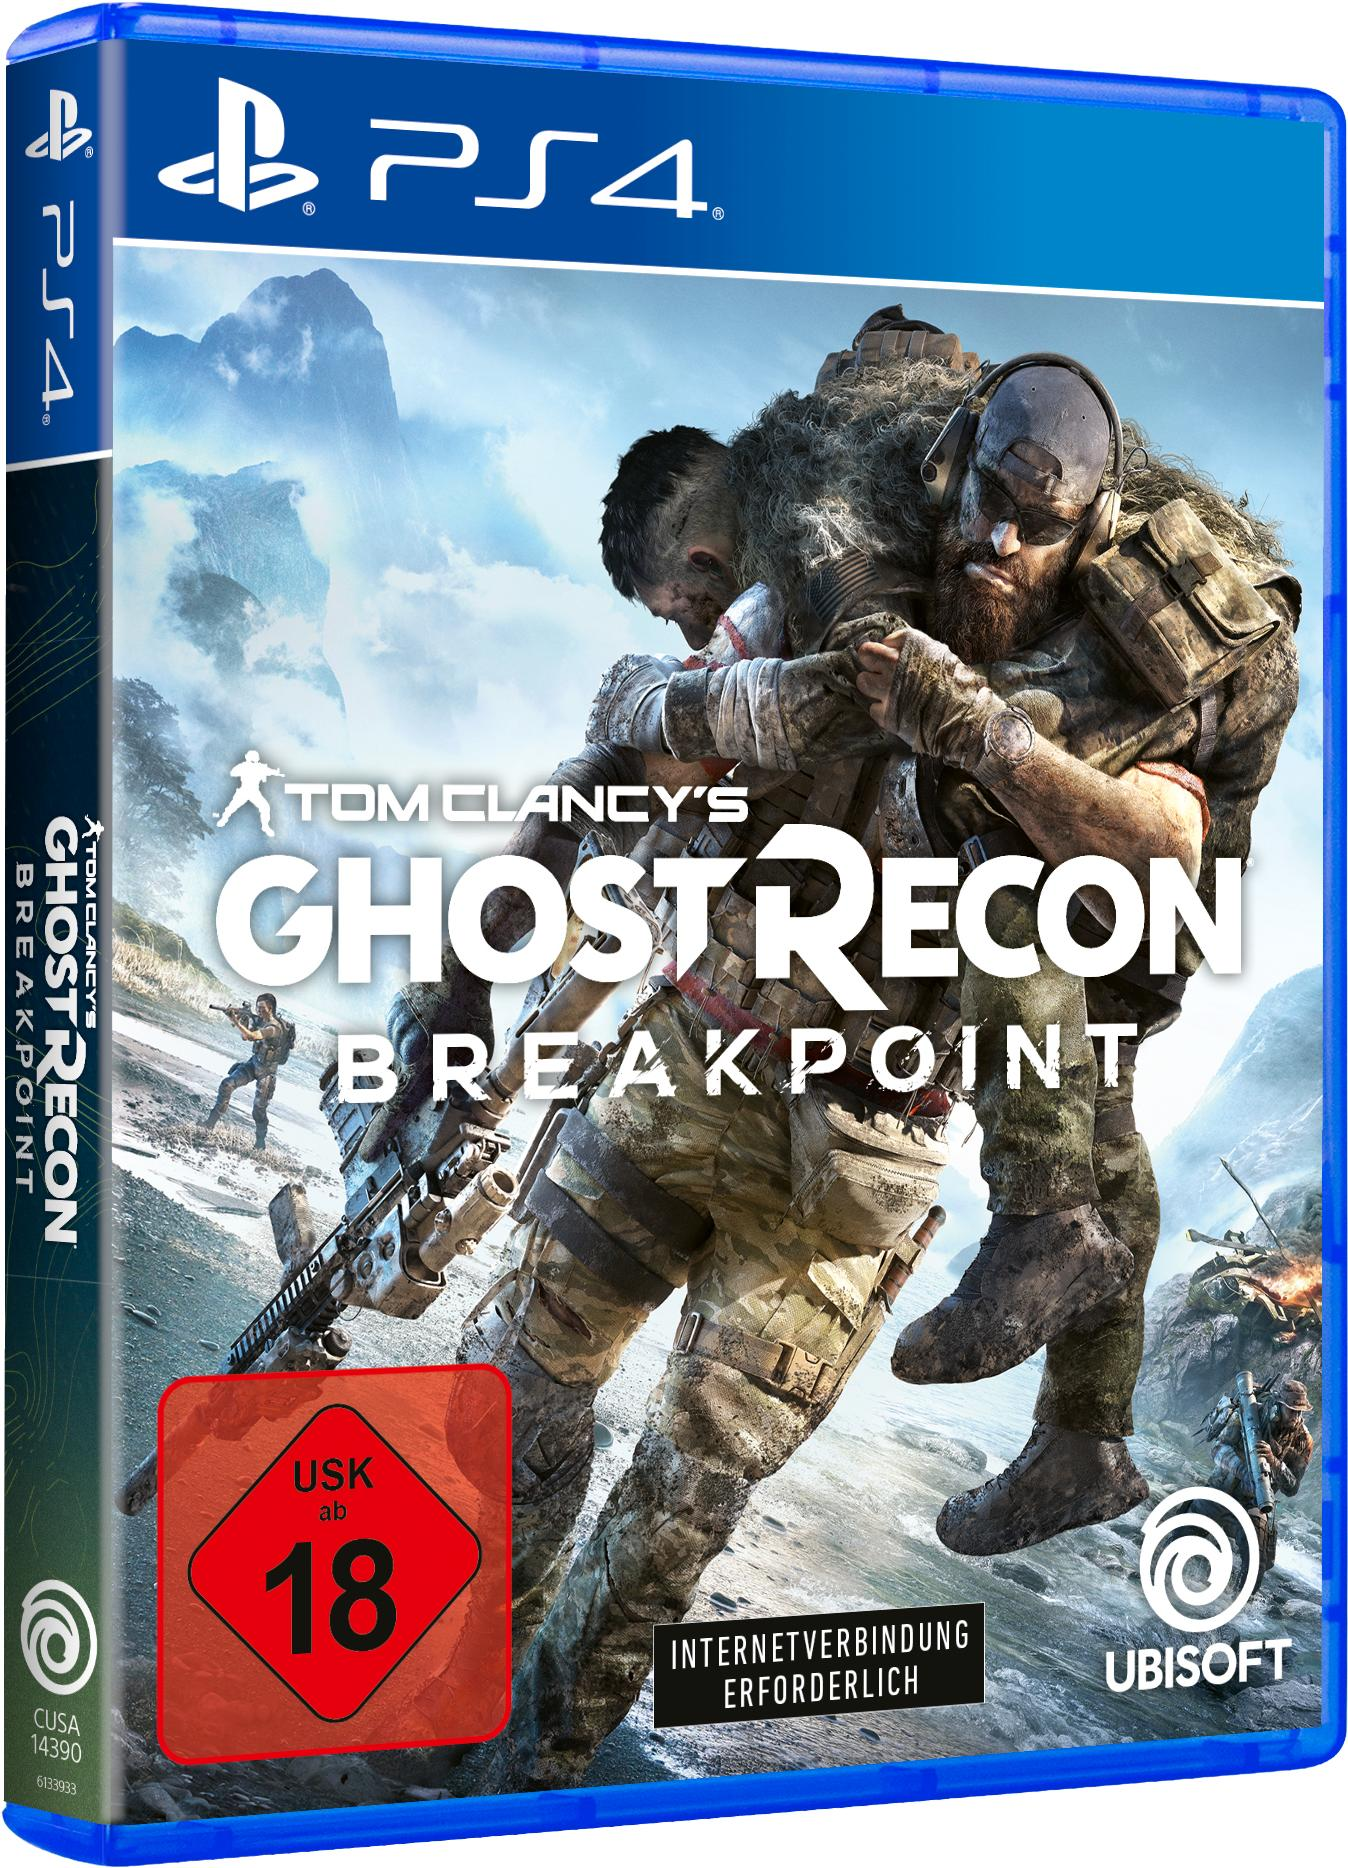 Tom Clancy’s Ghost Recon 4] - Breakpoint [PlayStation